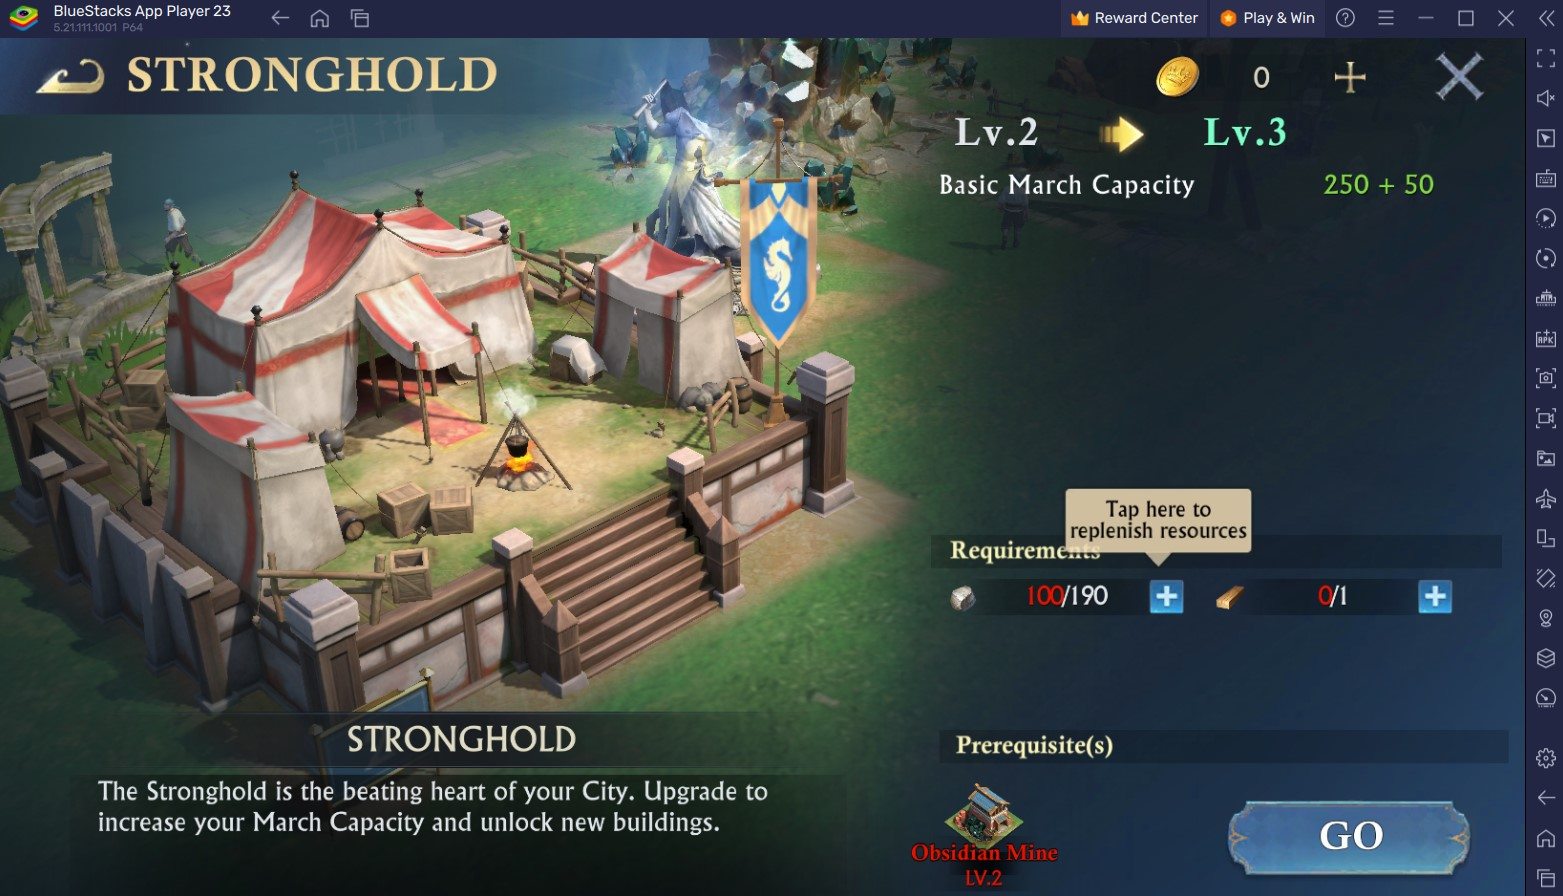 Stormshot: Isle of Adventure Tips and Tricks to Optimize Your Progression